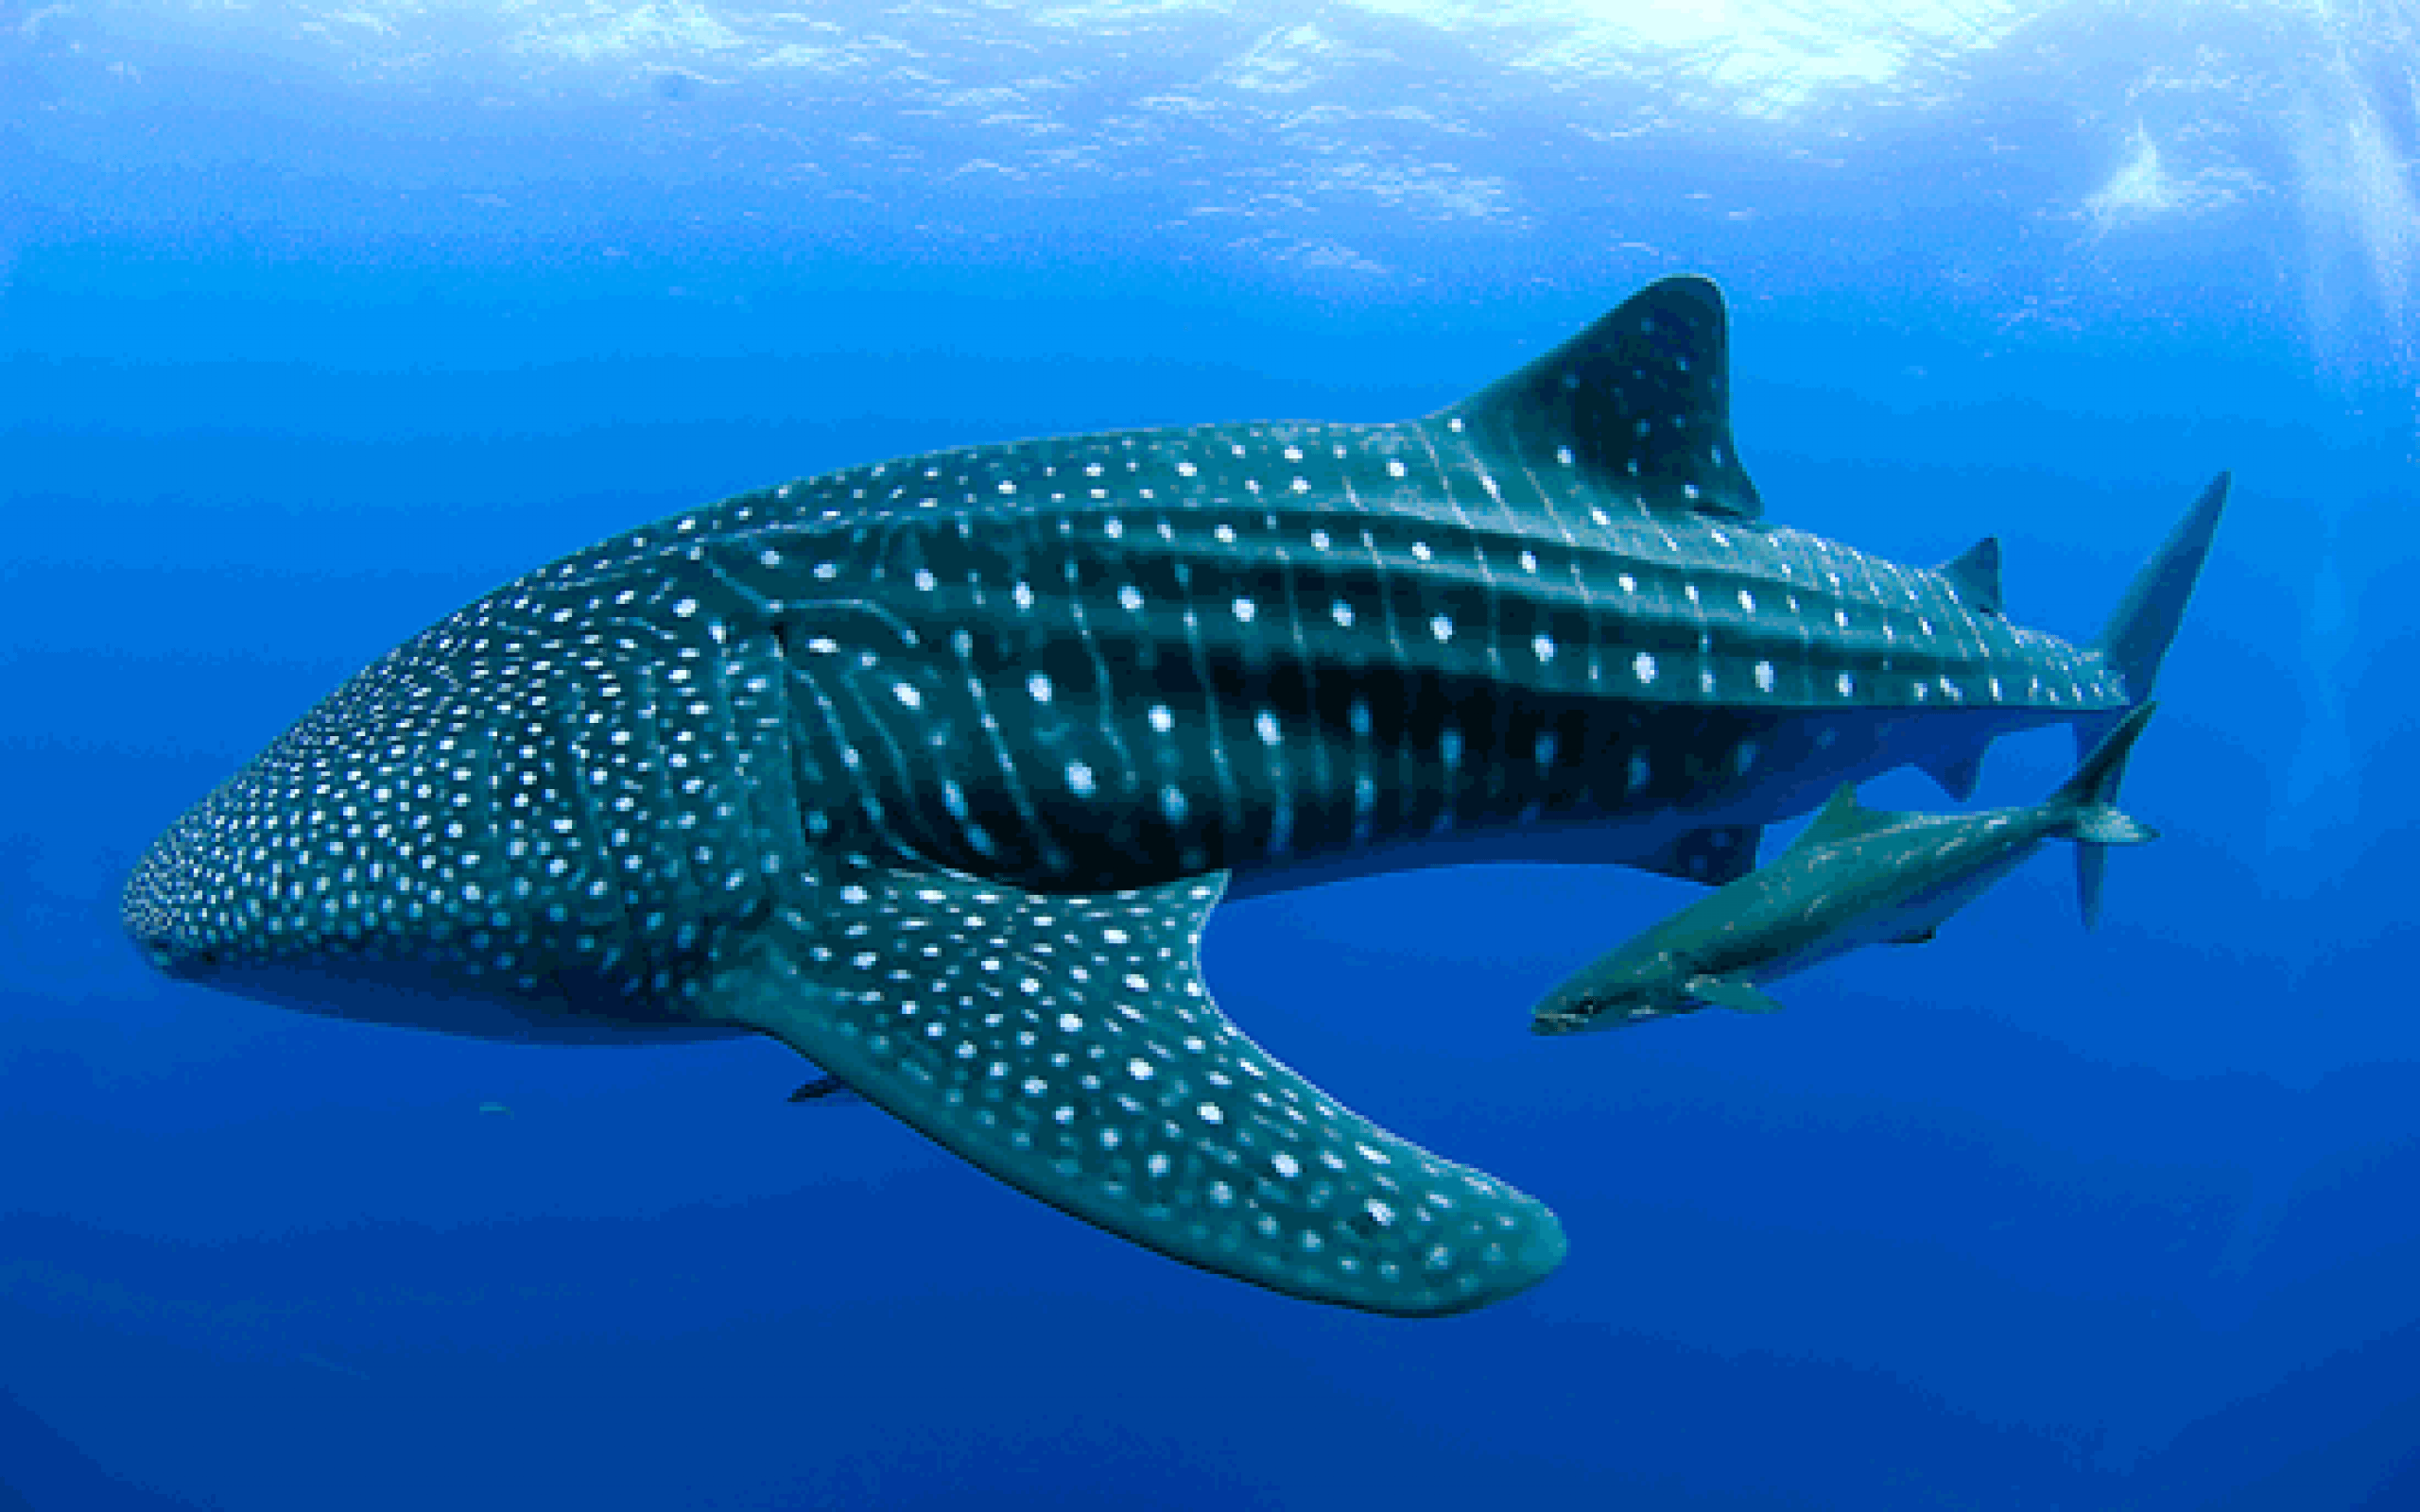 Floating Whale shark photo and wallpaper. Cute Floating Whale shark